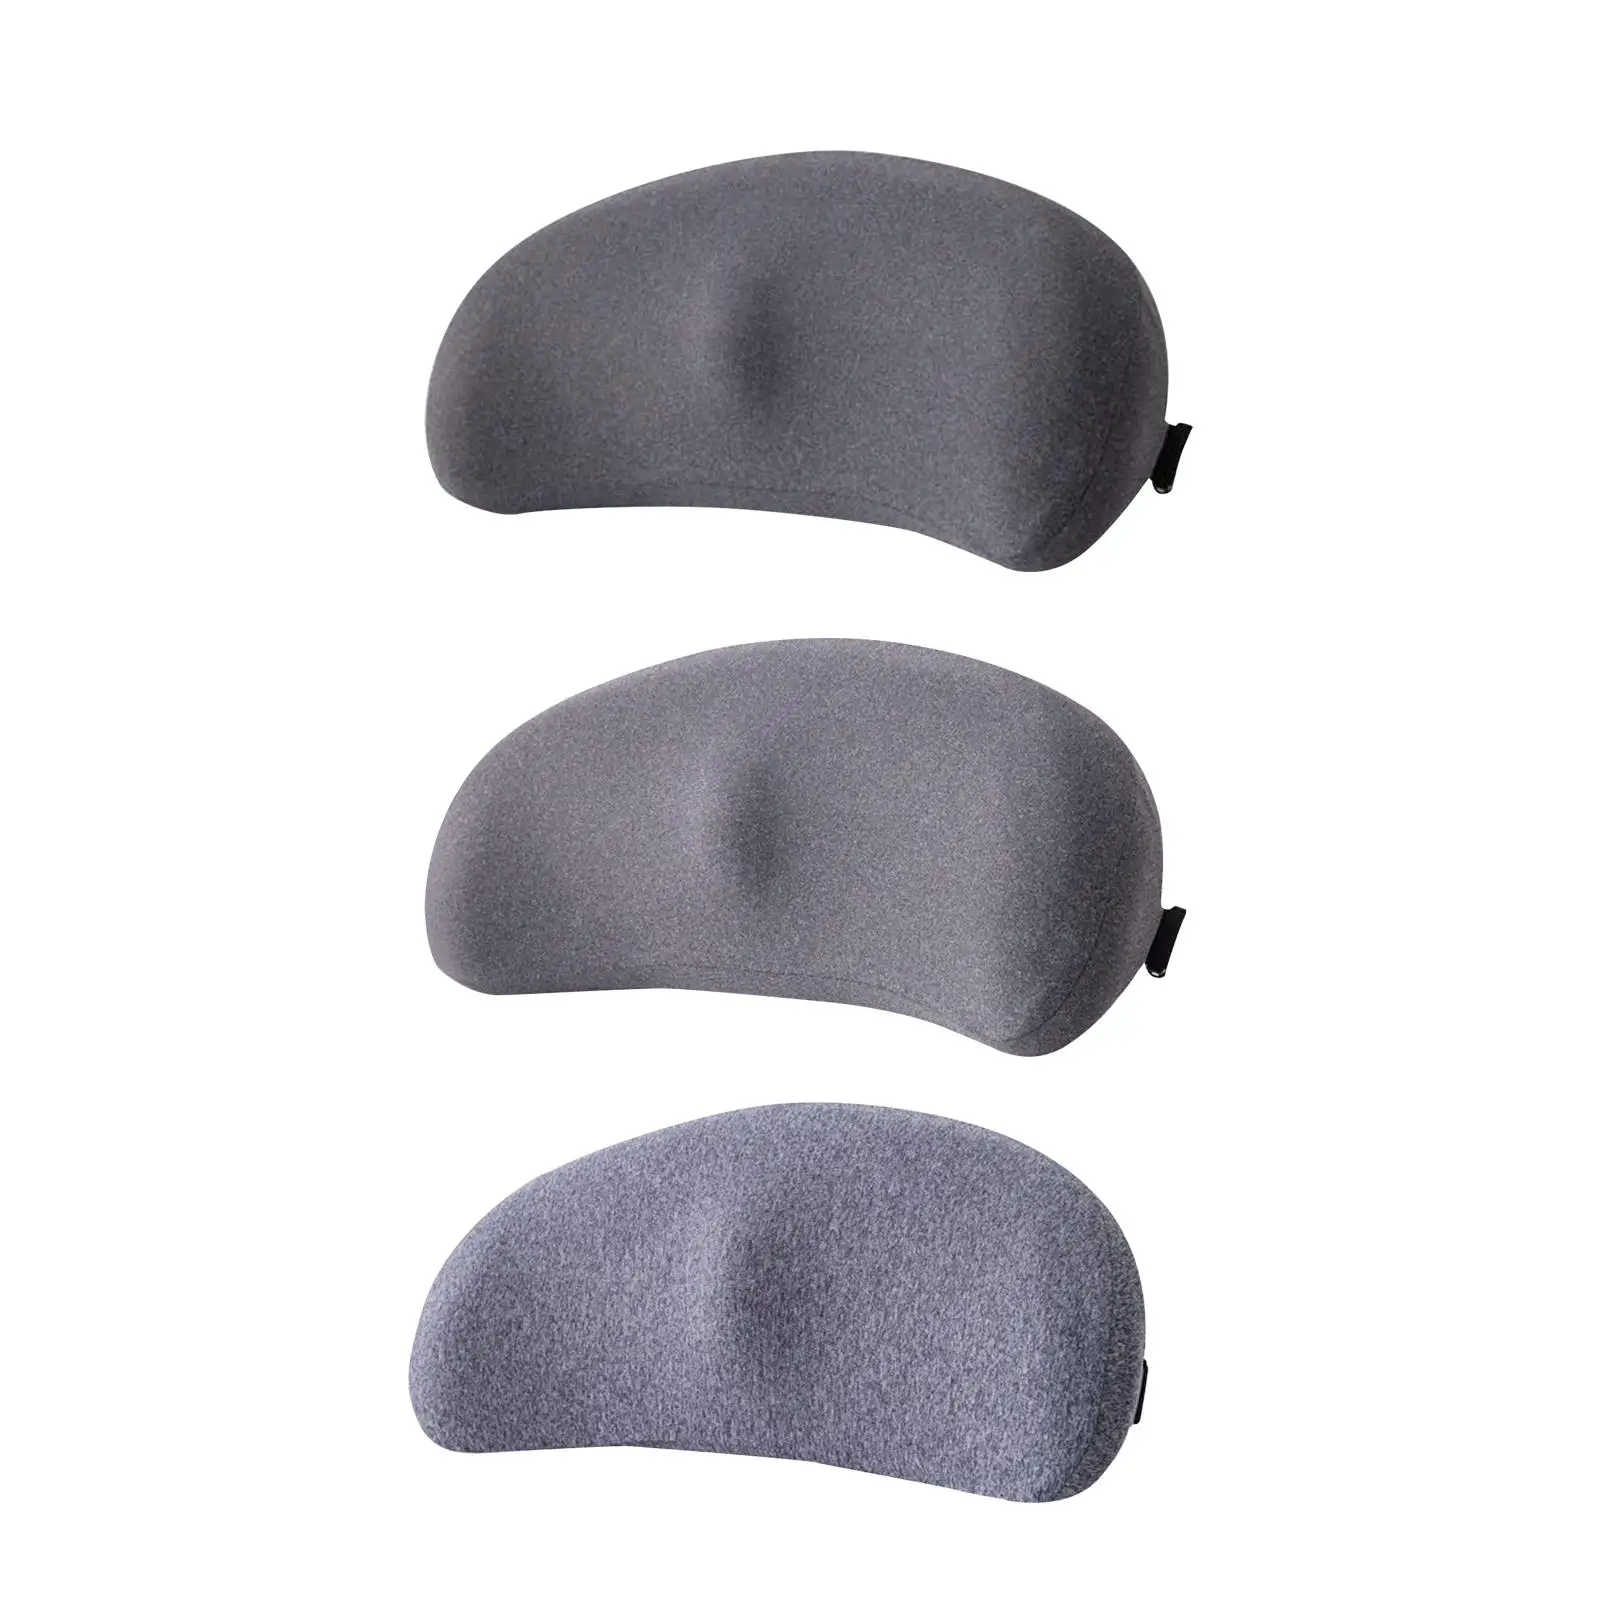 Support Pillow Adjustable Straps Multipurpose Comfortable Breathable for Car Driver